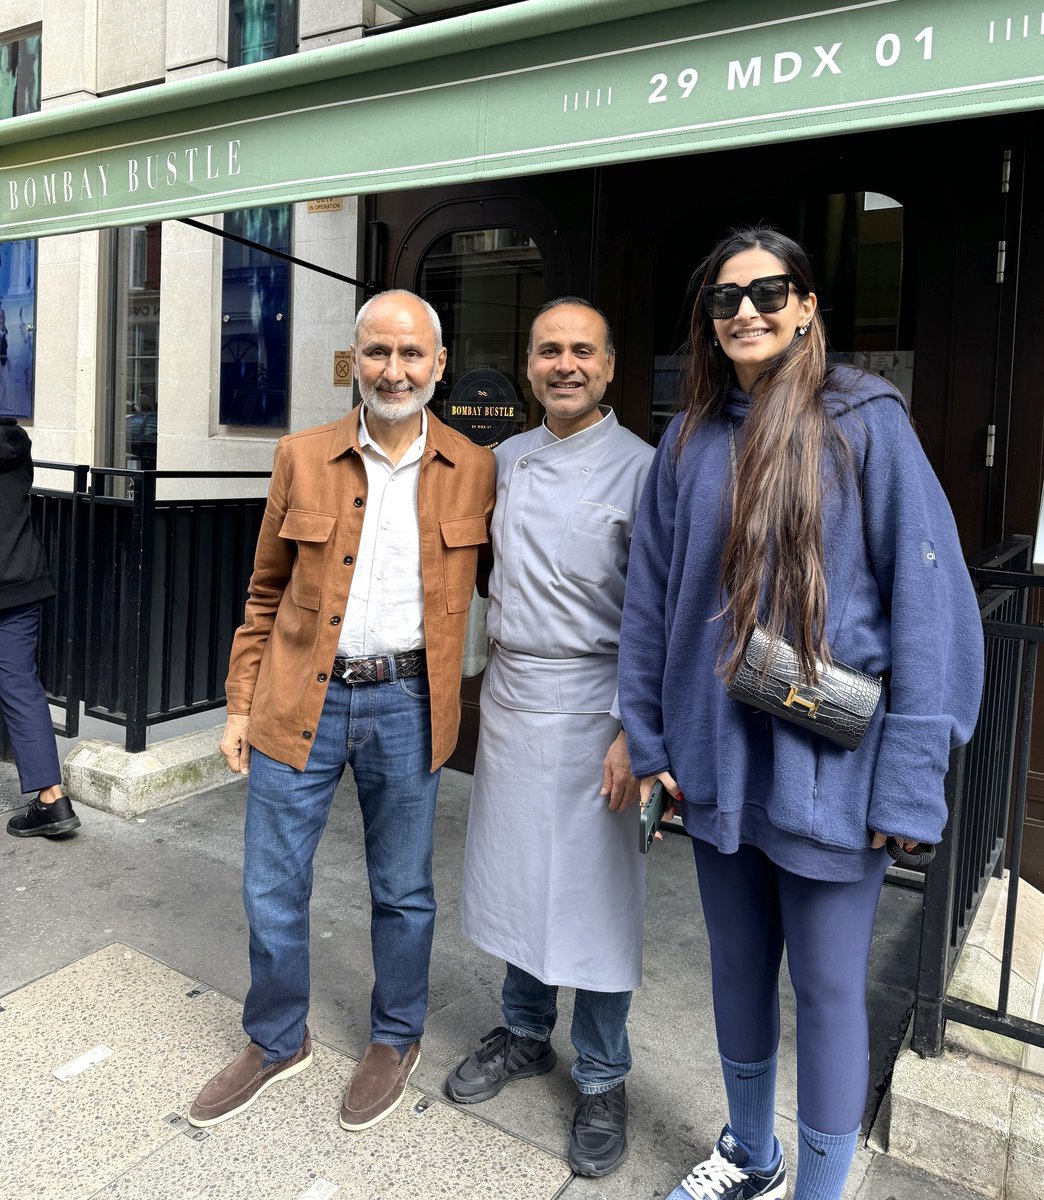 We're thrilled to welcome back the lovely @sonamkapoor to her favorite spot in London, @bombaybustle! It's always a delight to have our favorite guest with us again. Thank you for visiting us Sonam and Mr.Harish Ahuja.

#Mayfair #India  #London #bollywoodstar #bollywood